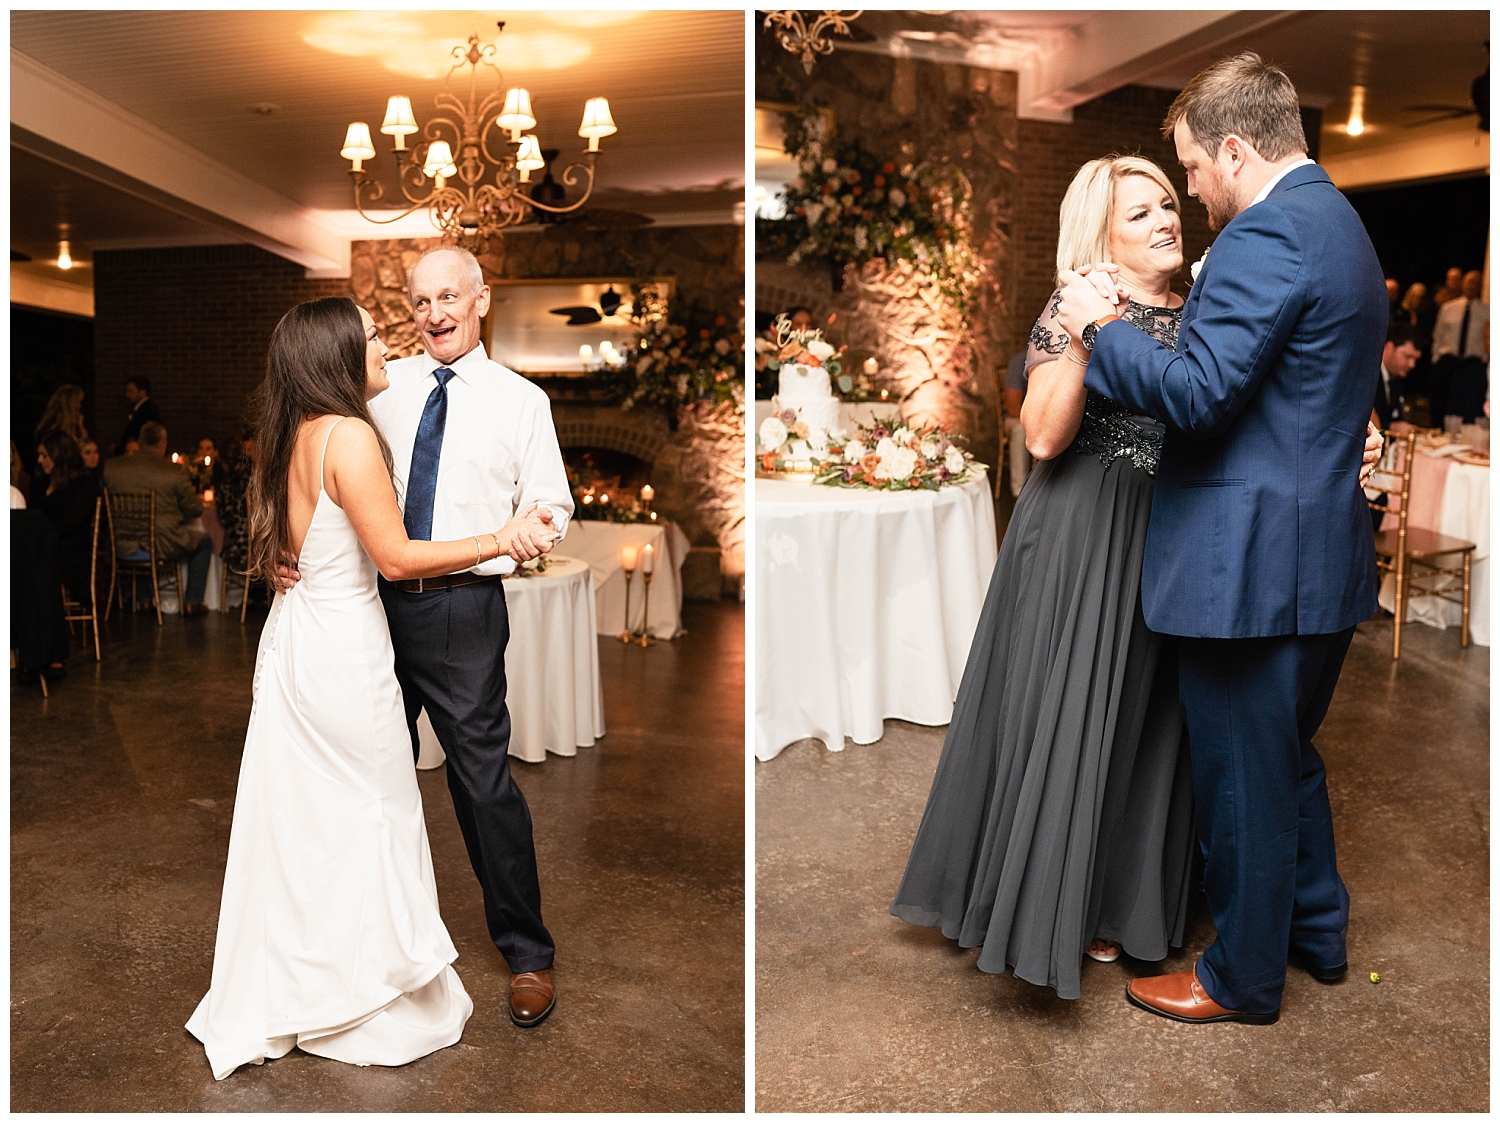 Dances with mom and dad at wedding